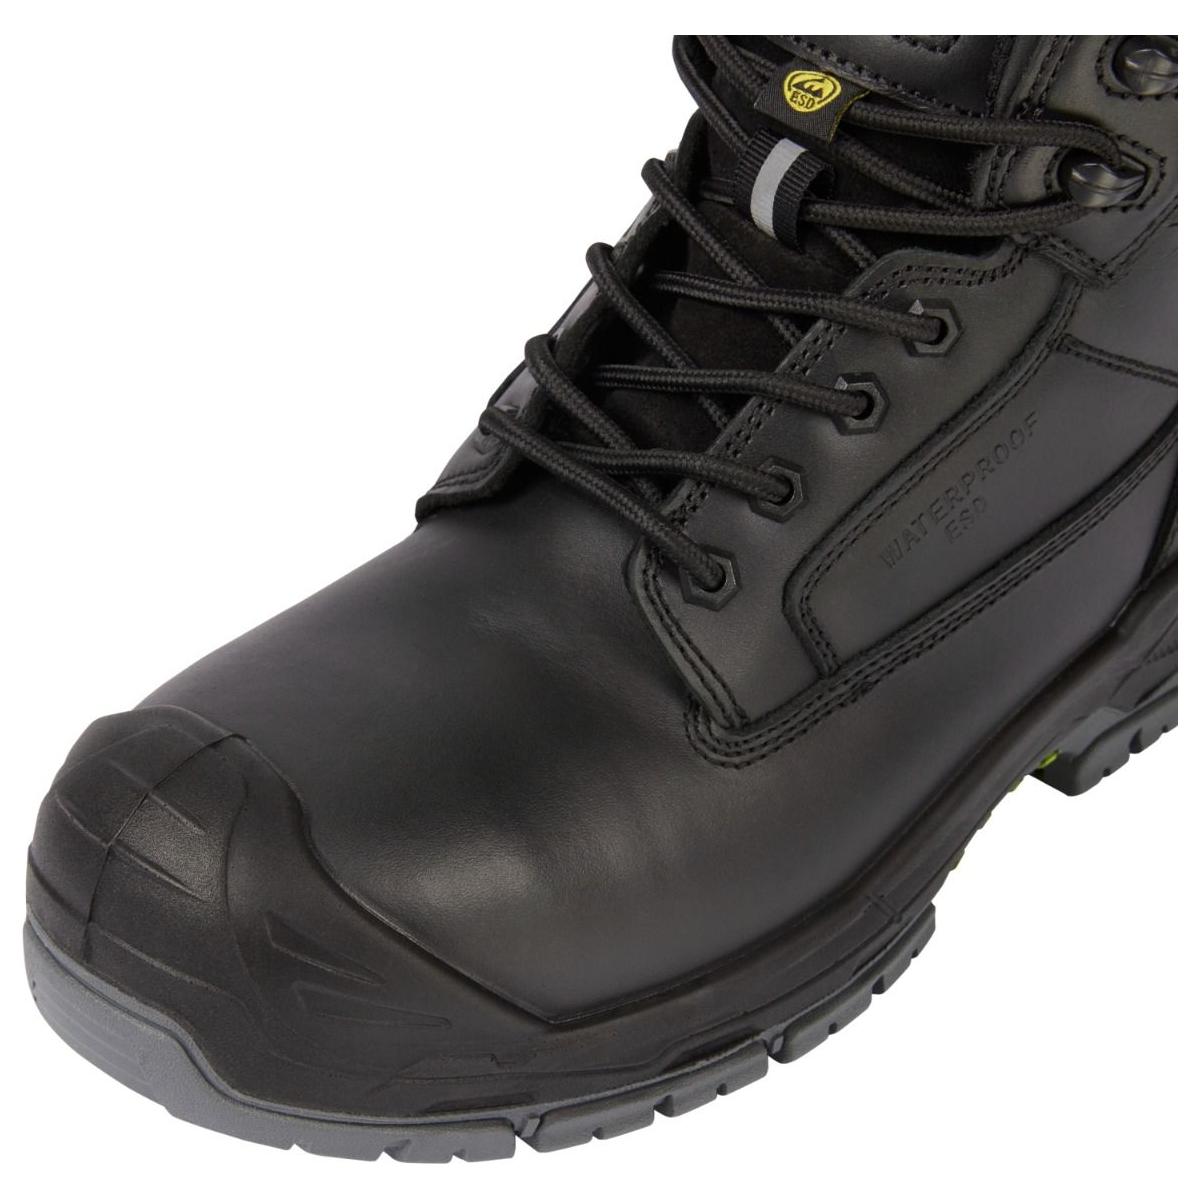 Apache Cranbrook Waterproof ESD Safety Boot Black S7S